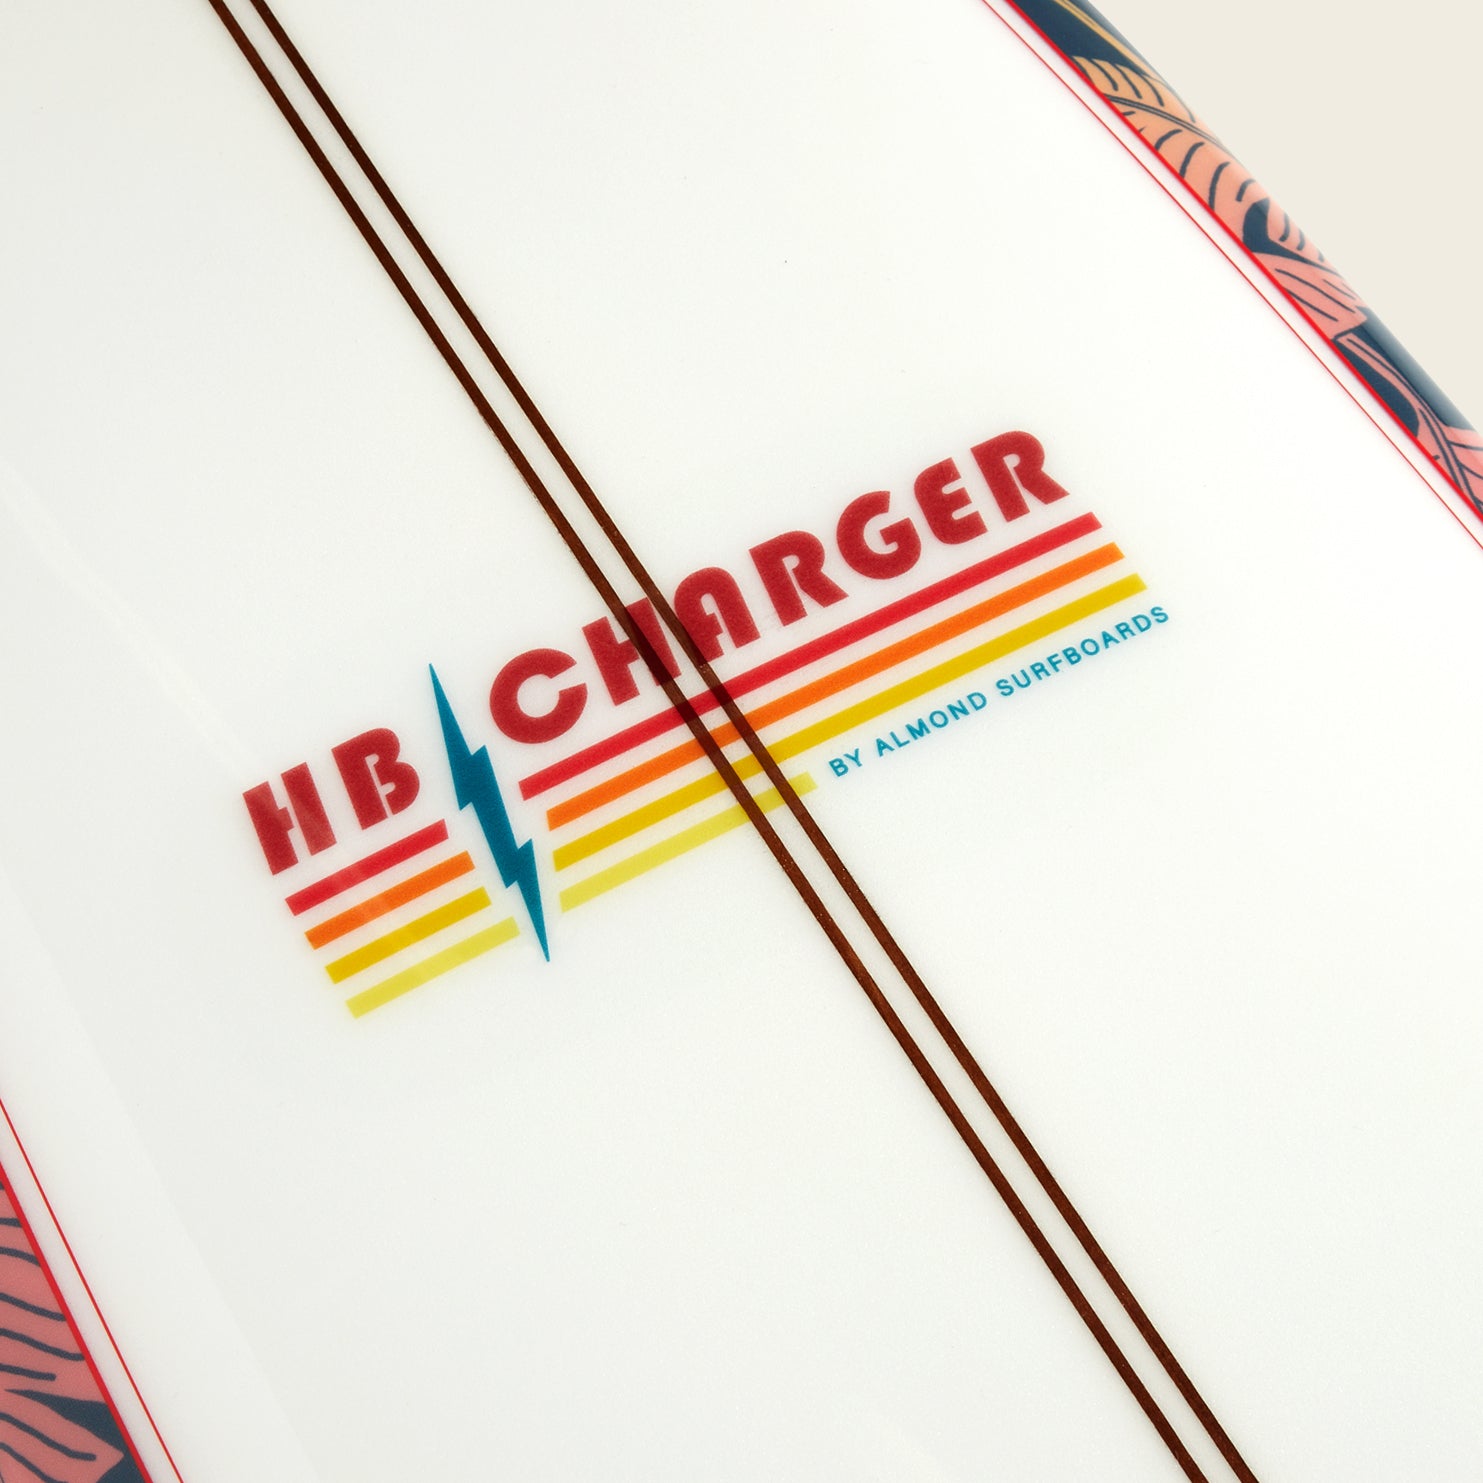 Almond HB Chargers Surfboard 7'-2"